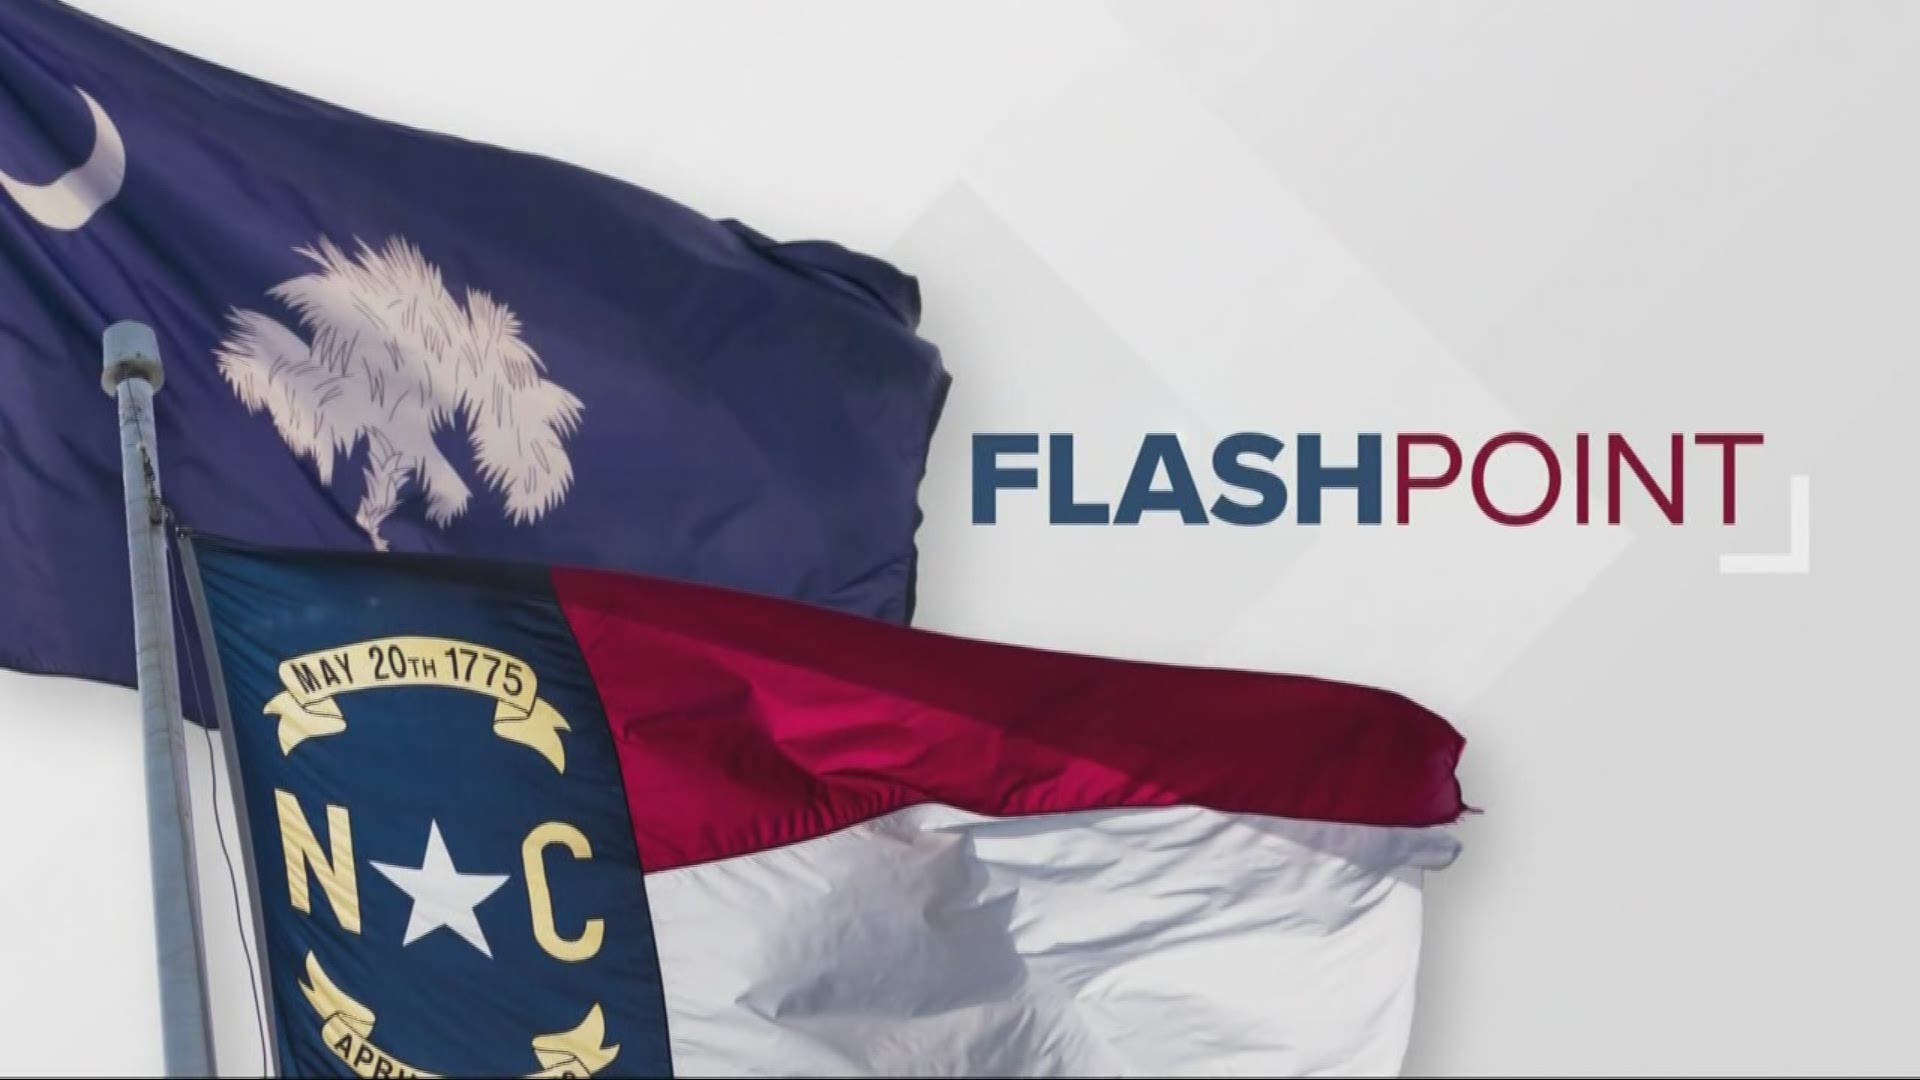 Flashpoint 7/19: Charlotte Councilman, Braxton Winston says the community has to treat each other better in response to the violent crime spike.